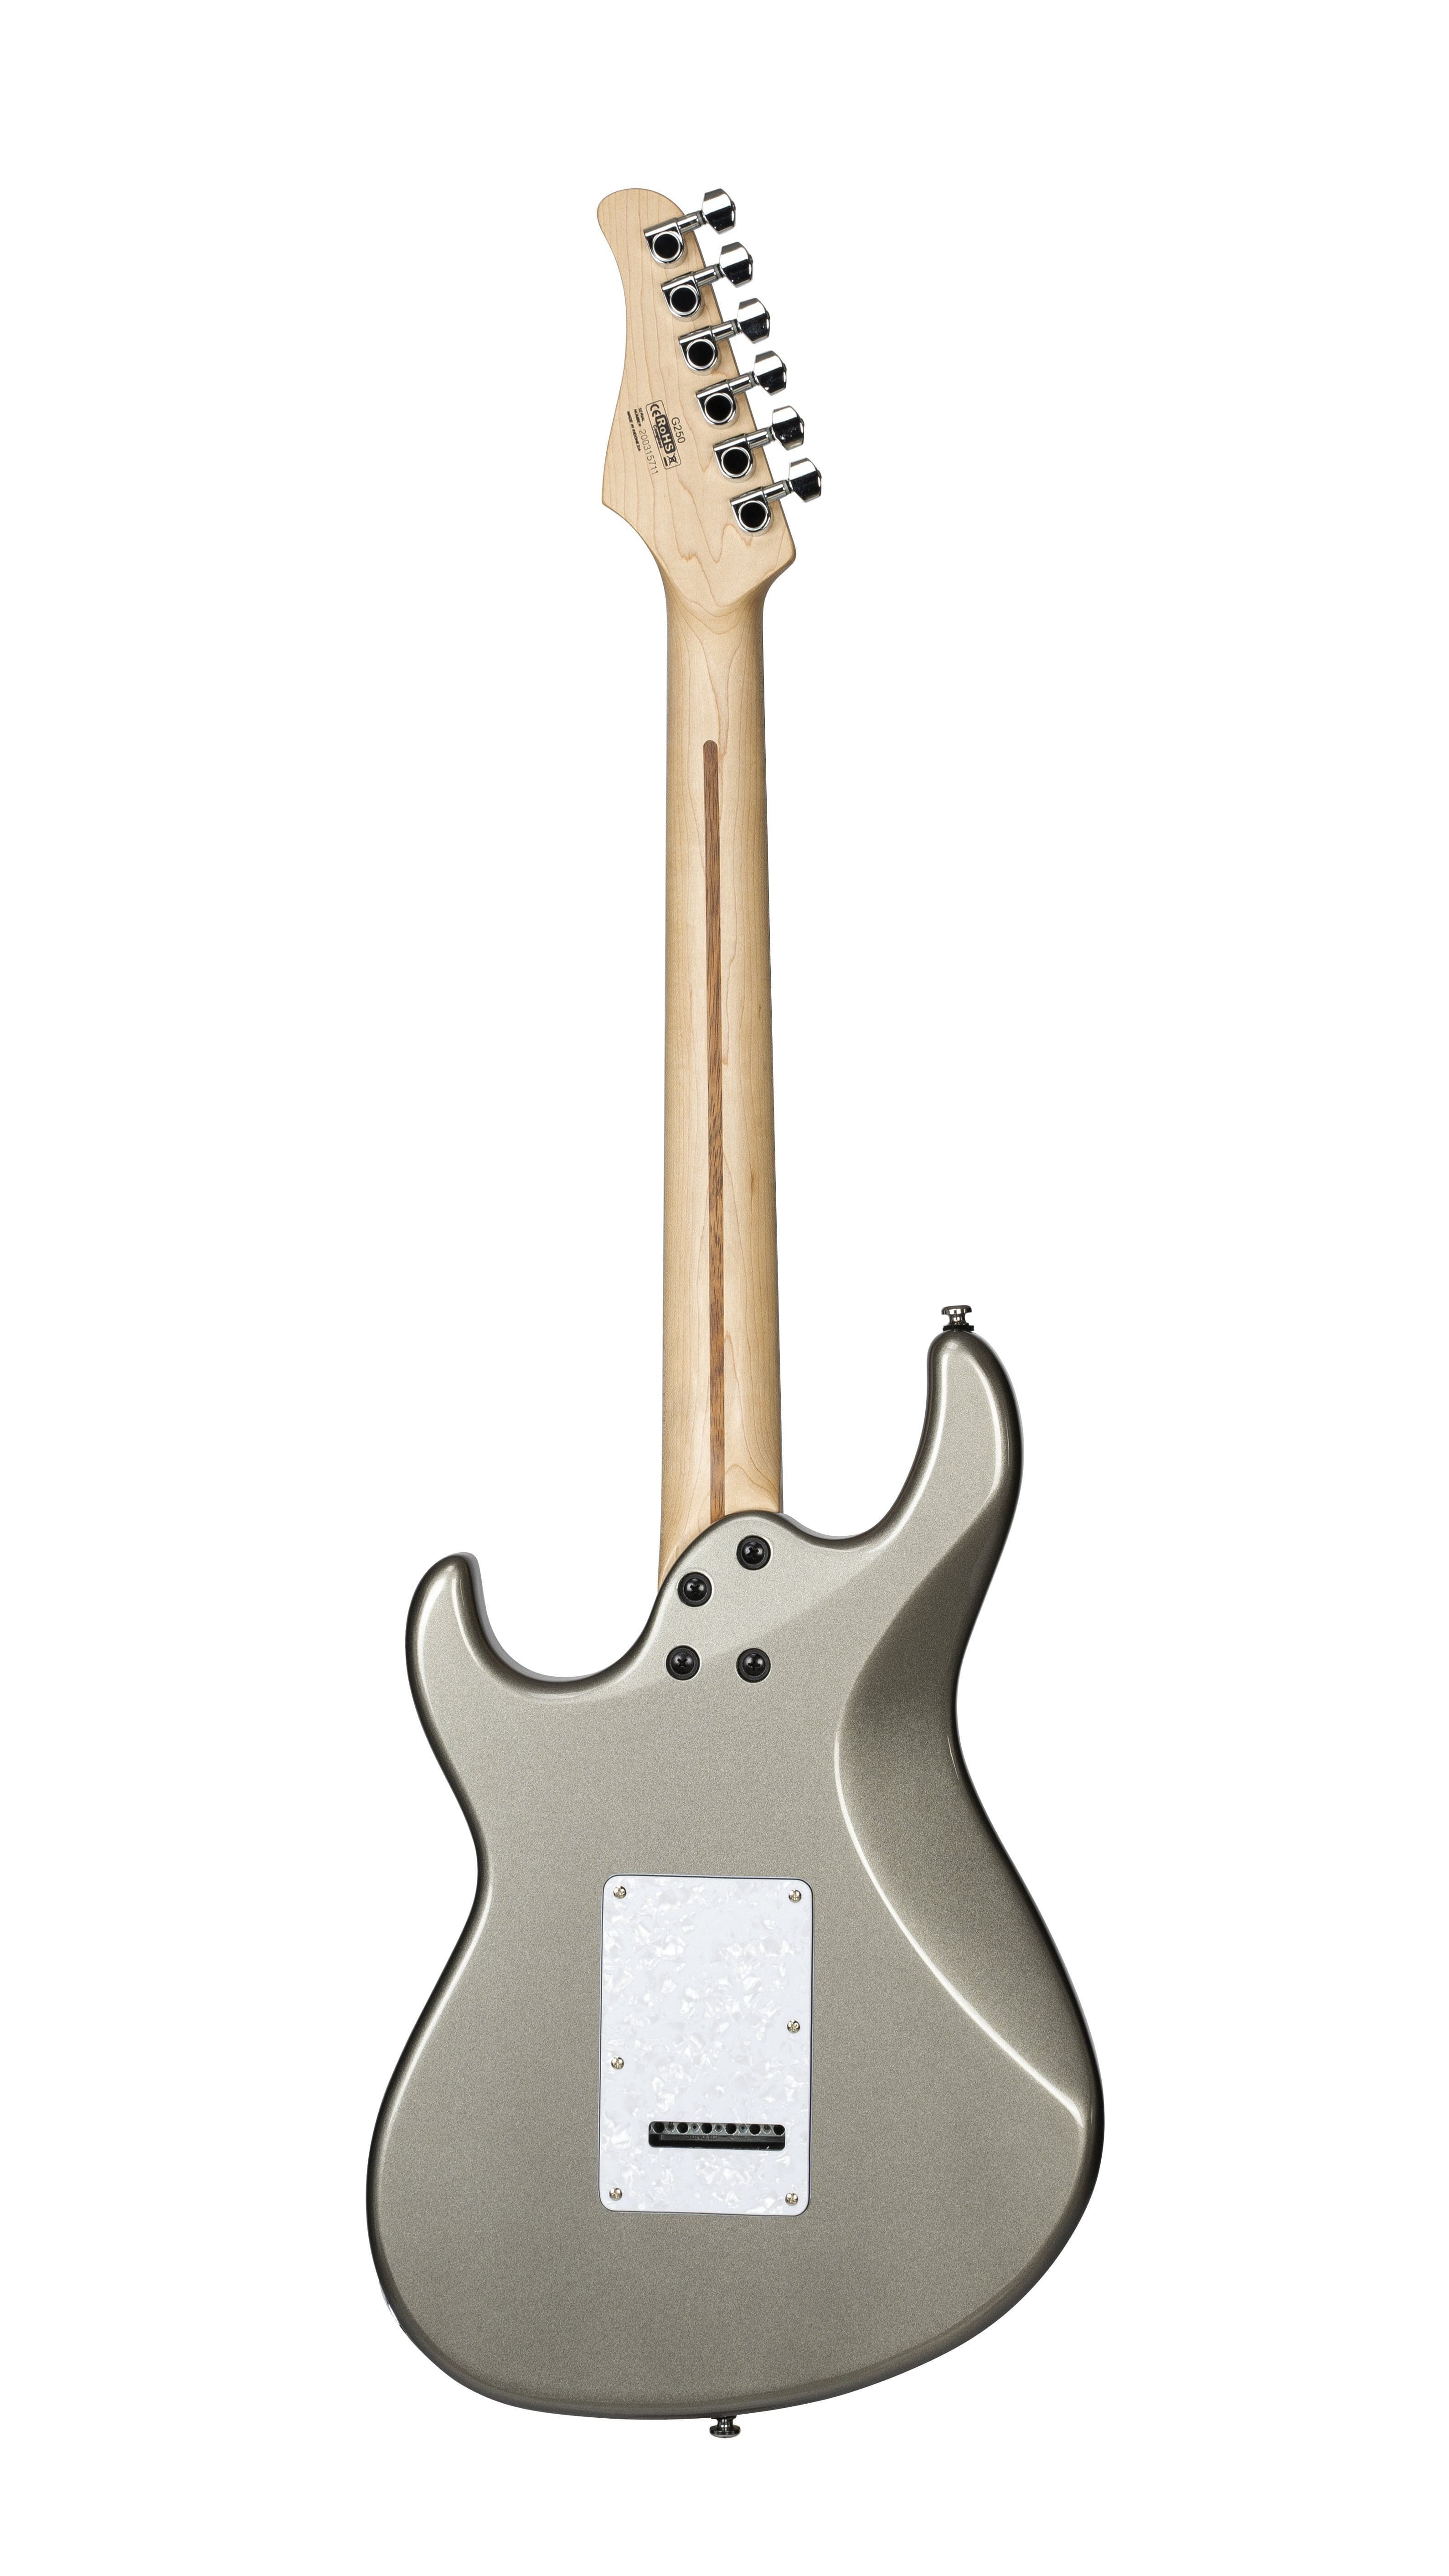 Cort G250 Silver Metallic, Electric Guitar for sale at Richards Guitars.